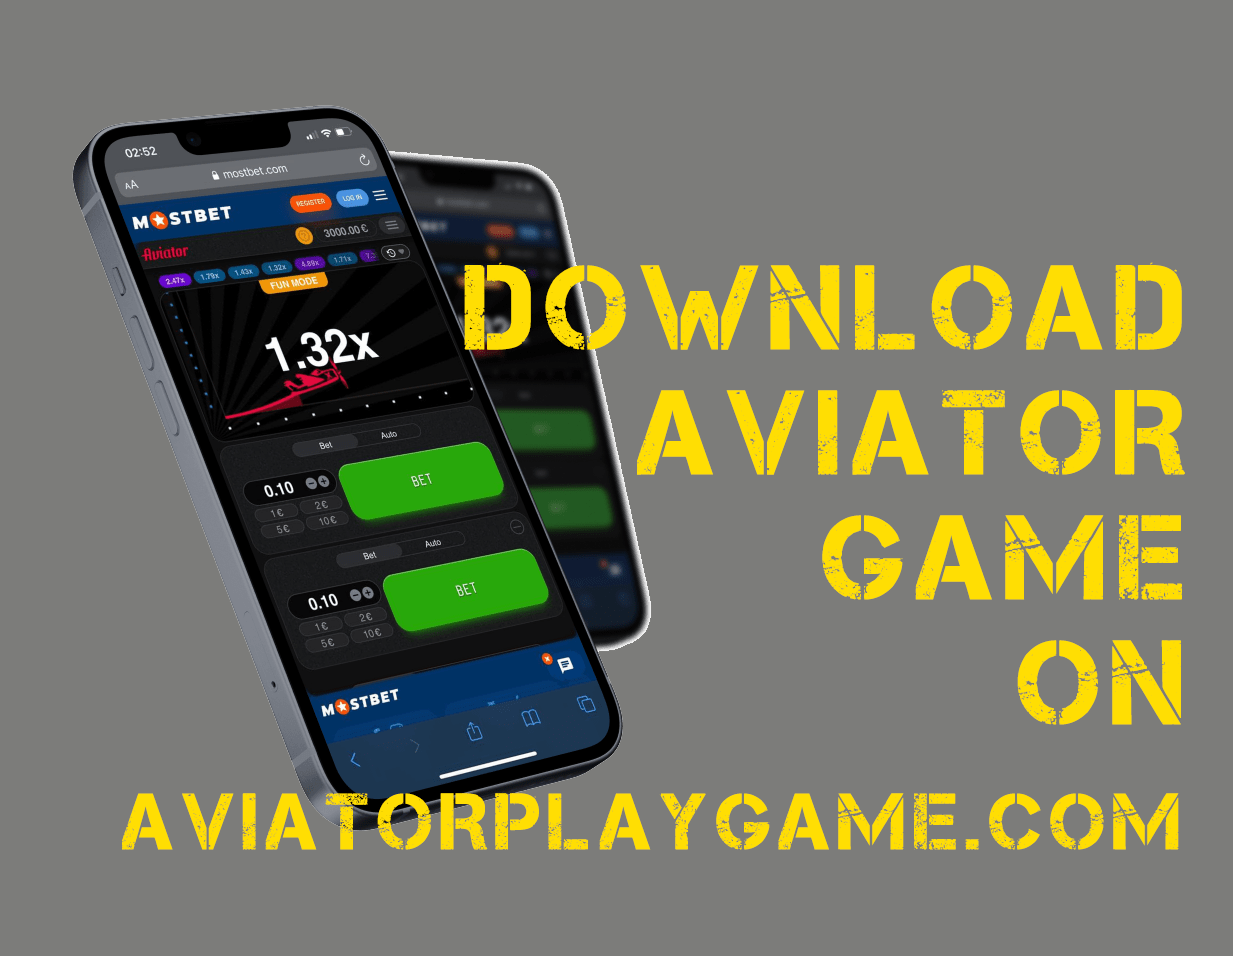 Update Download Aviator Section